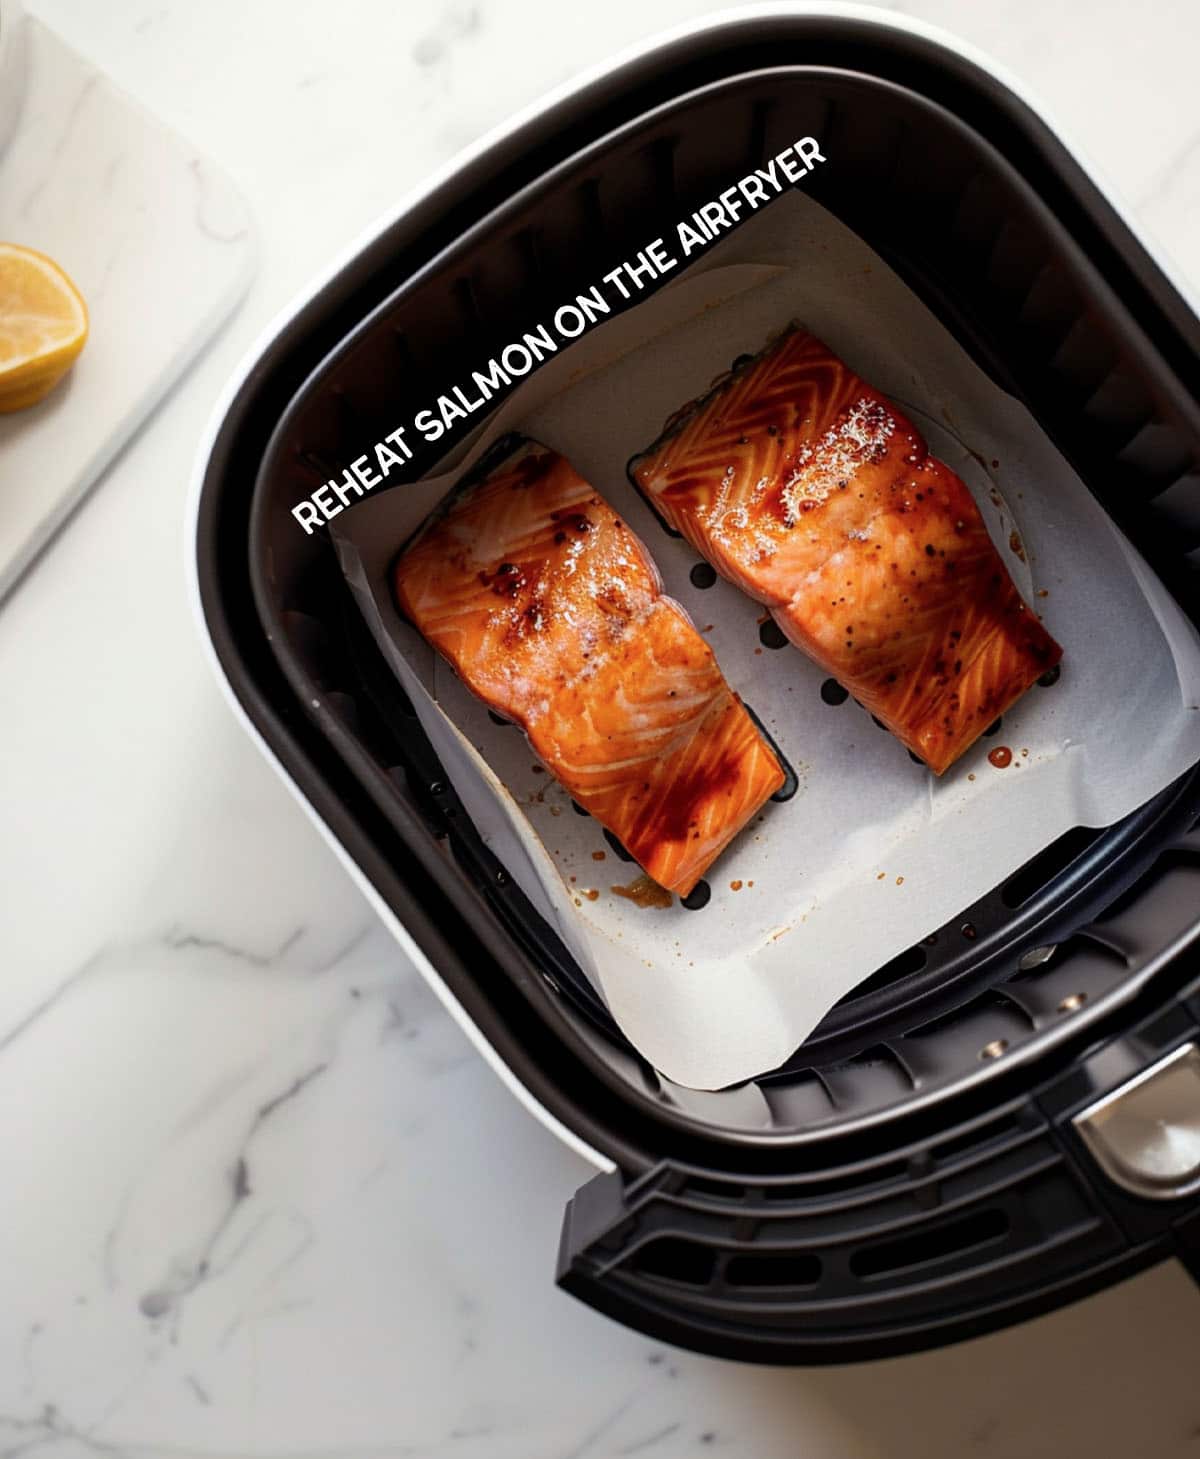 Salmon fillet placed in an air fryer basket for reheating.